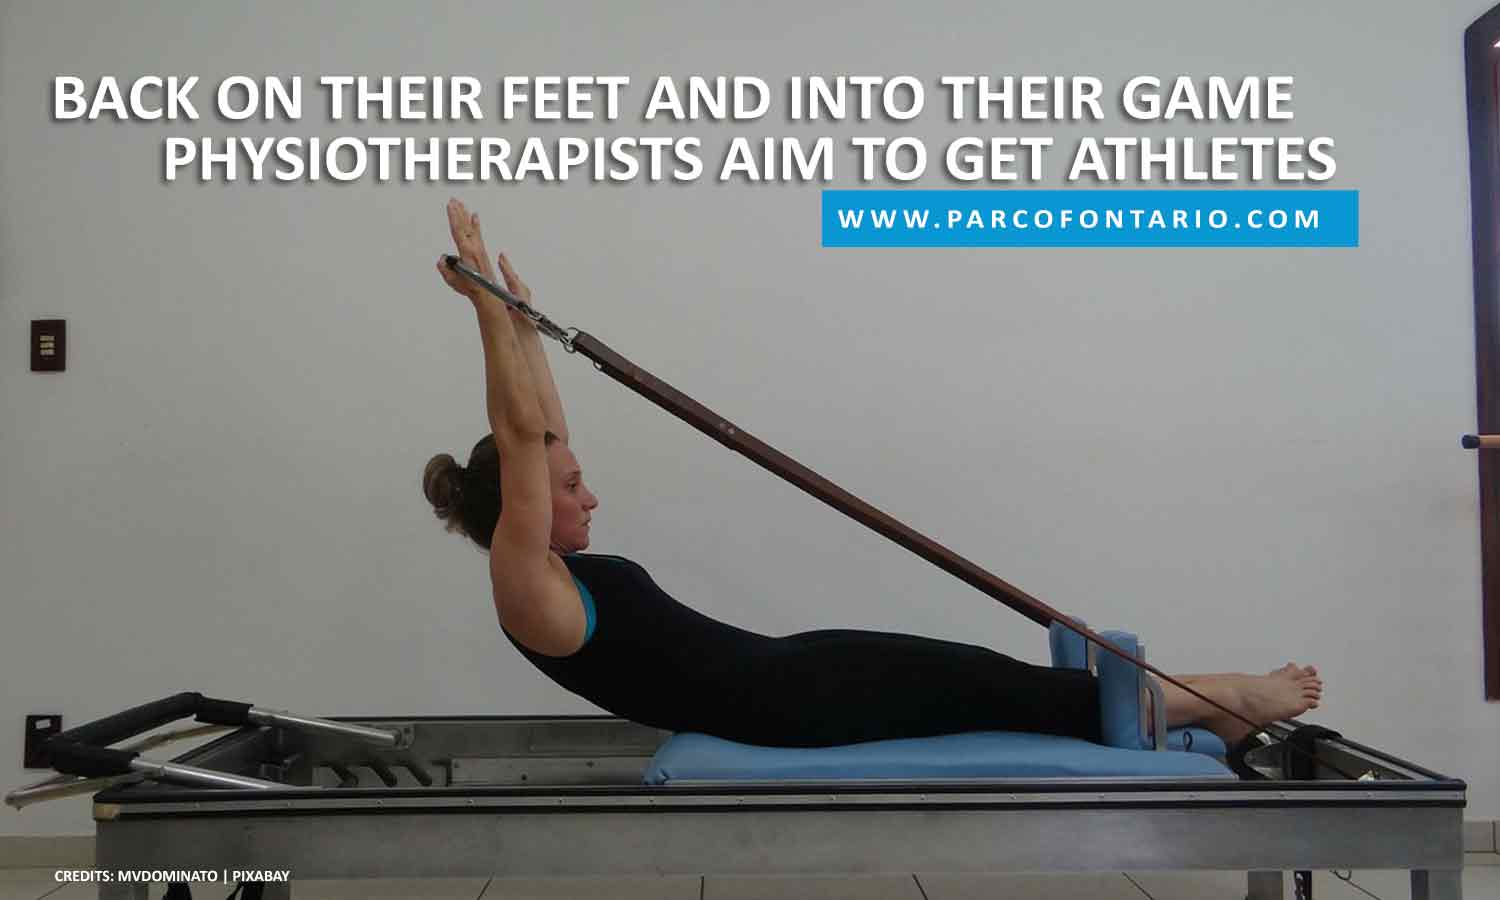 Physiotherapists aim to get athletes back